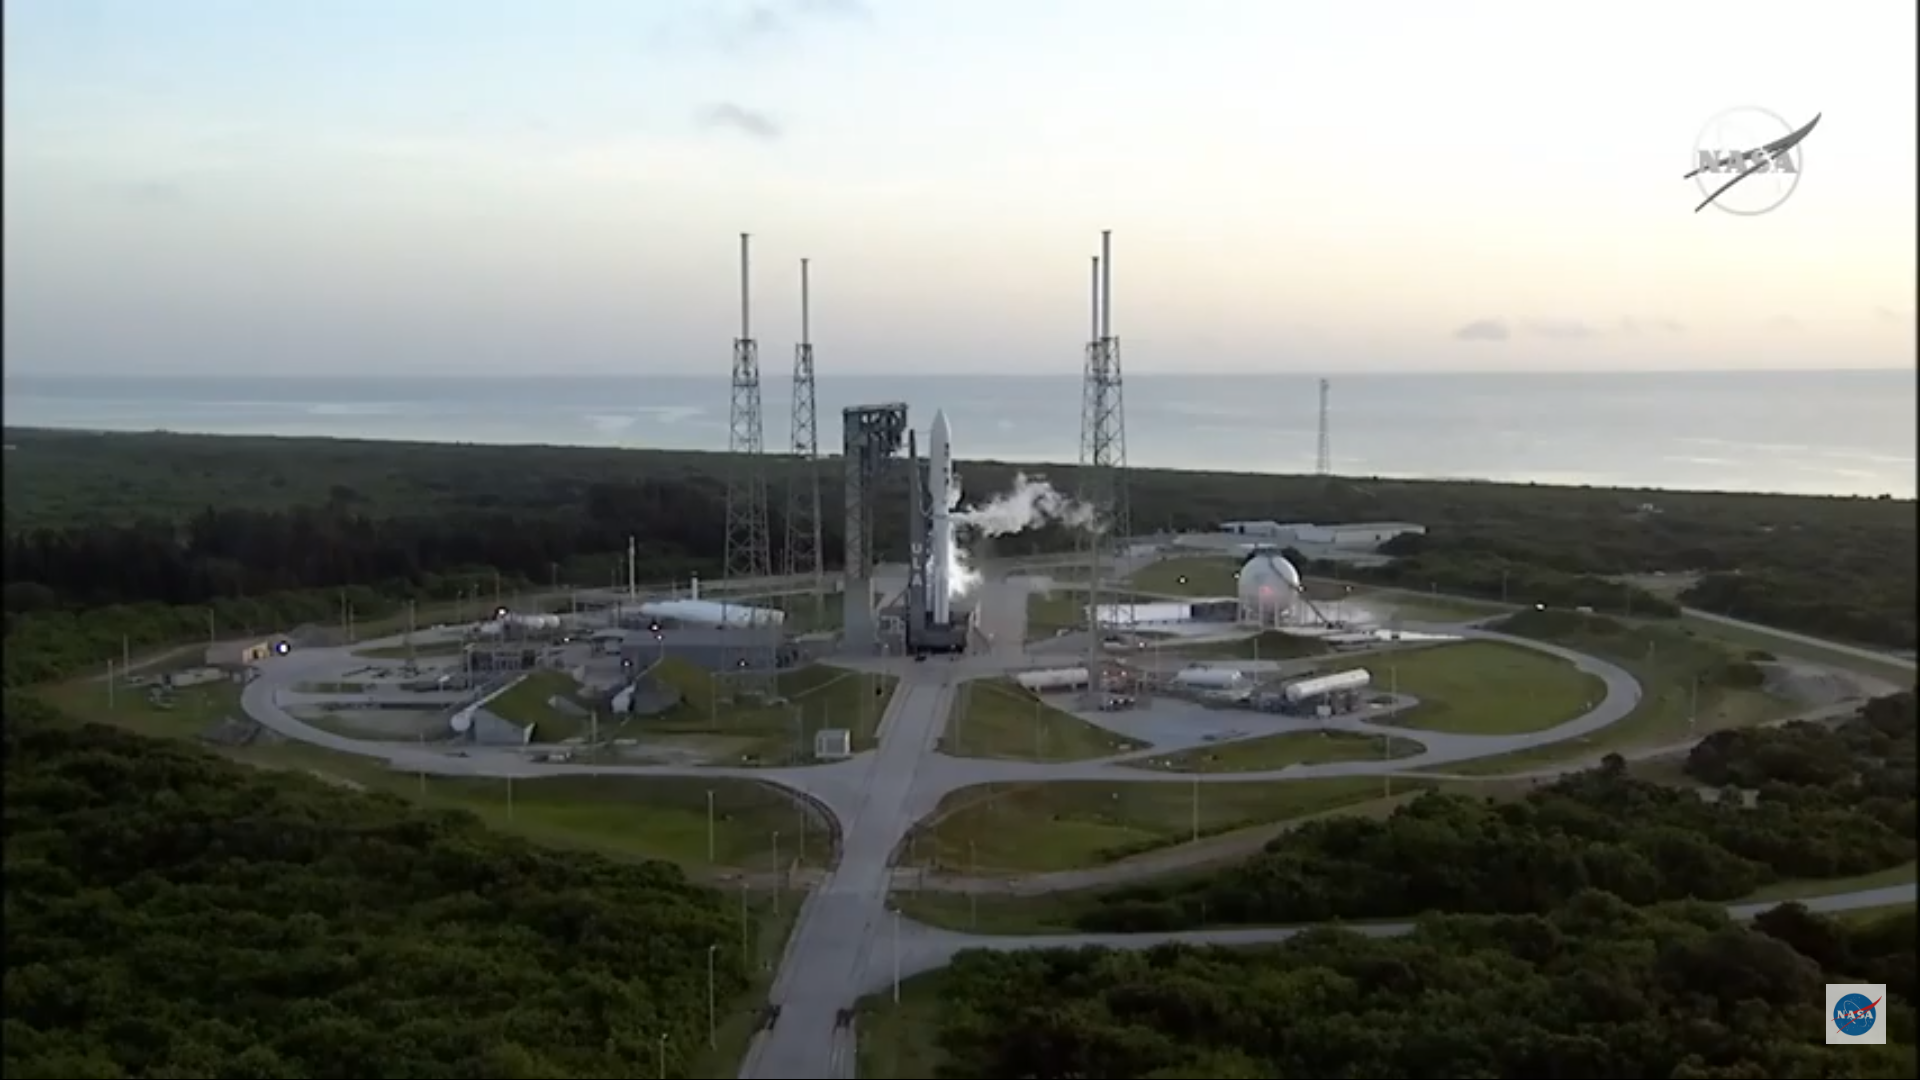 A view of the United Launch Alliance Atlas V rocket holding the massive Mars rover Perseverance on the launch pad in Florida, as seen about one hour before the launch window opened on July 30, 2020.